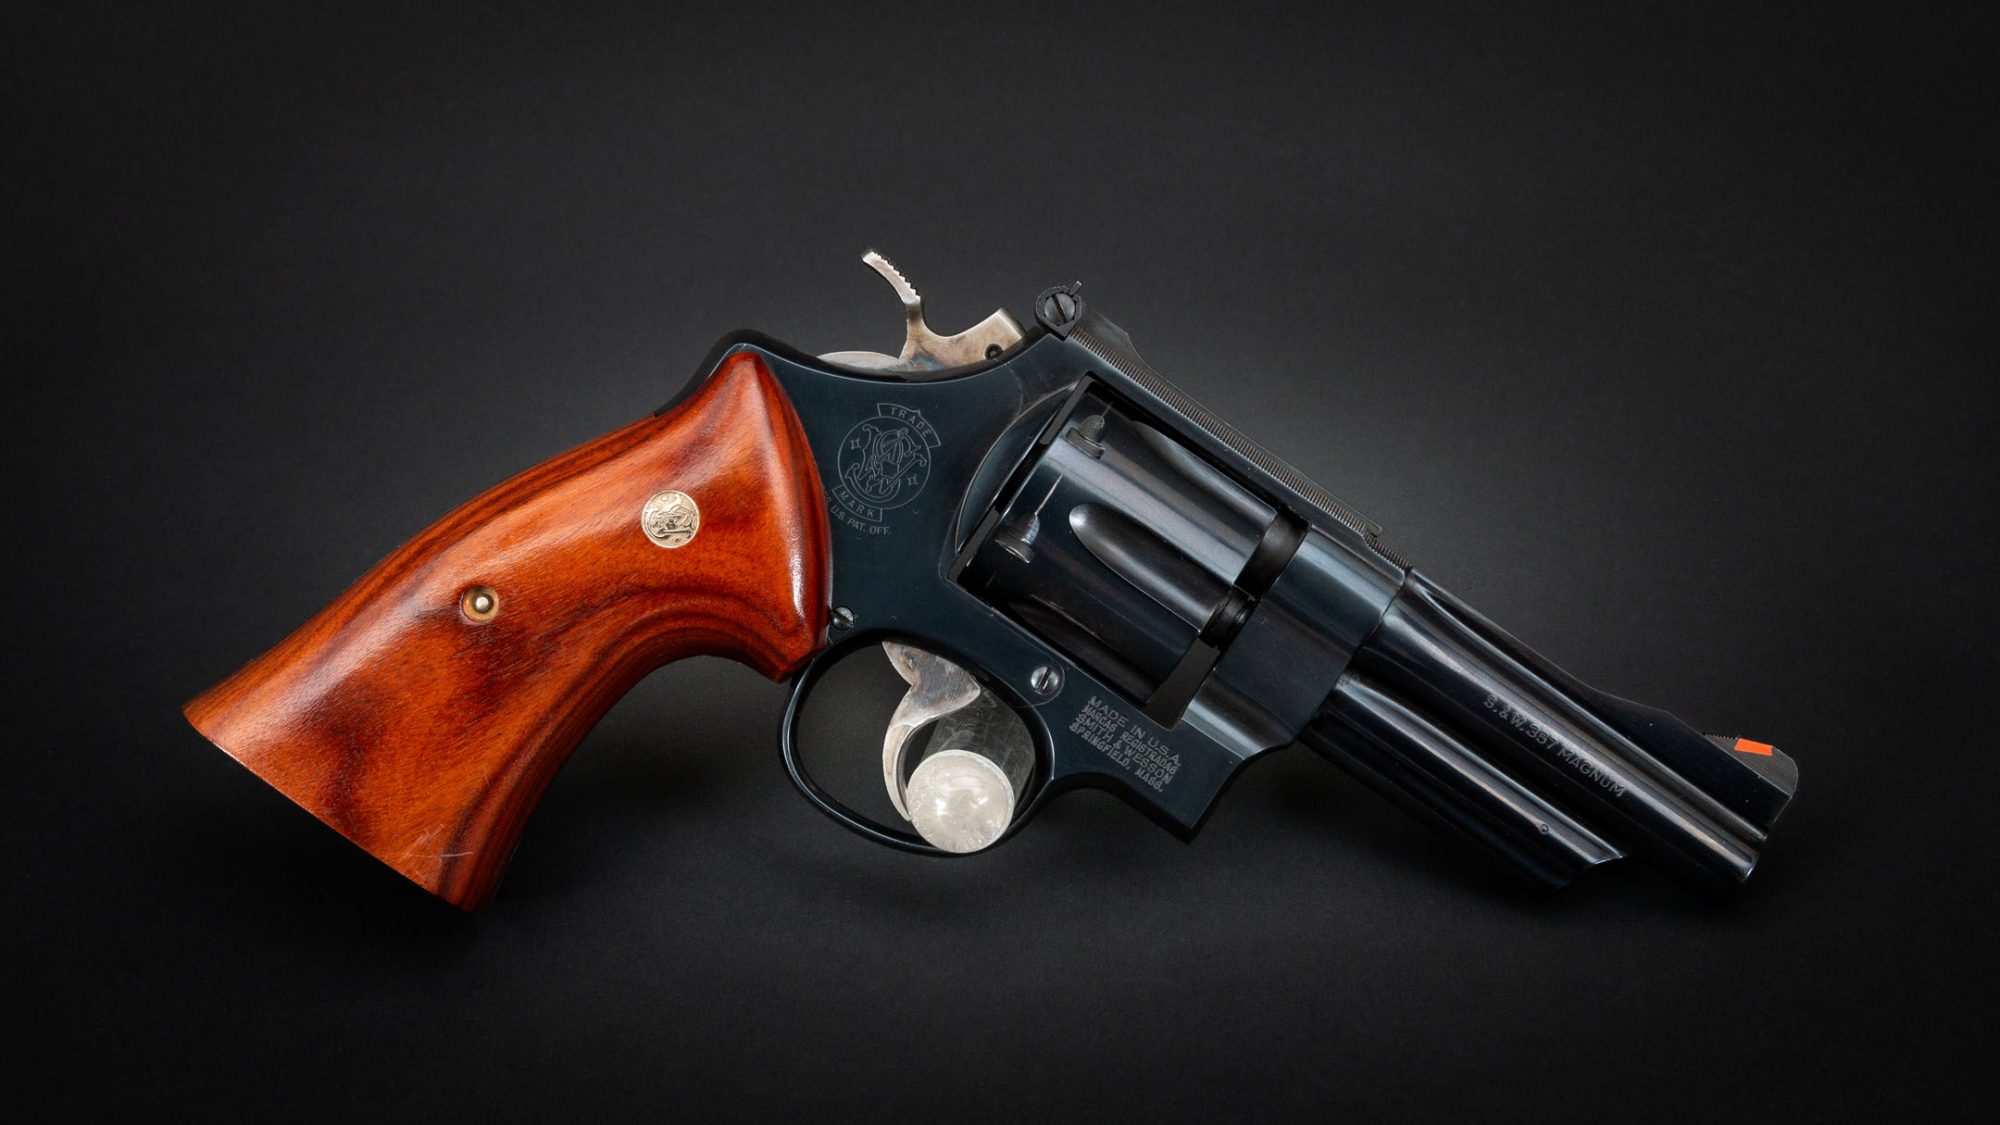 Smith & Wesson Model 27-4 in 357 Magnum, for sale by Turnbull Restoration Co. of Bloomfield, NY